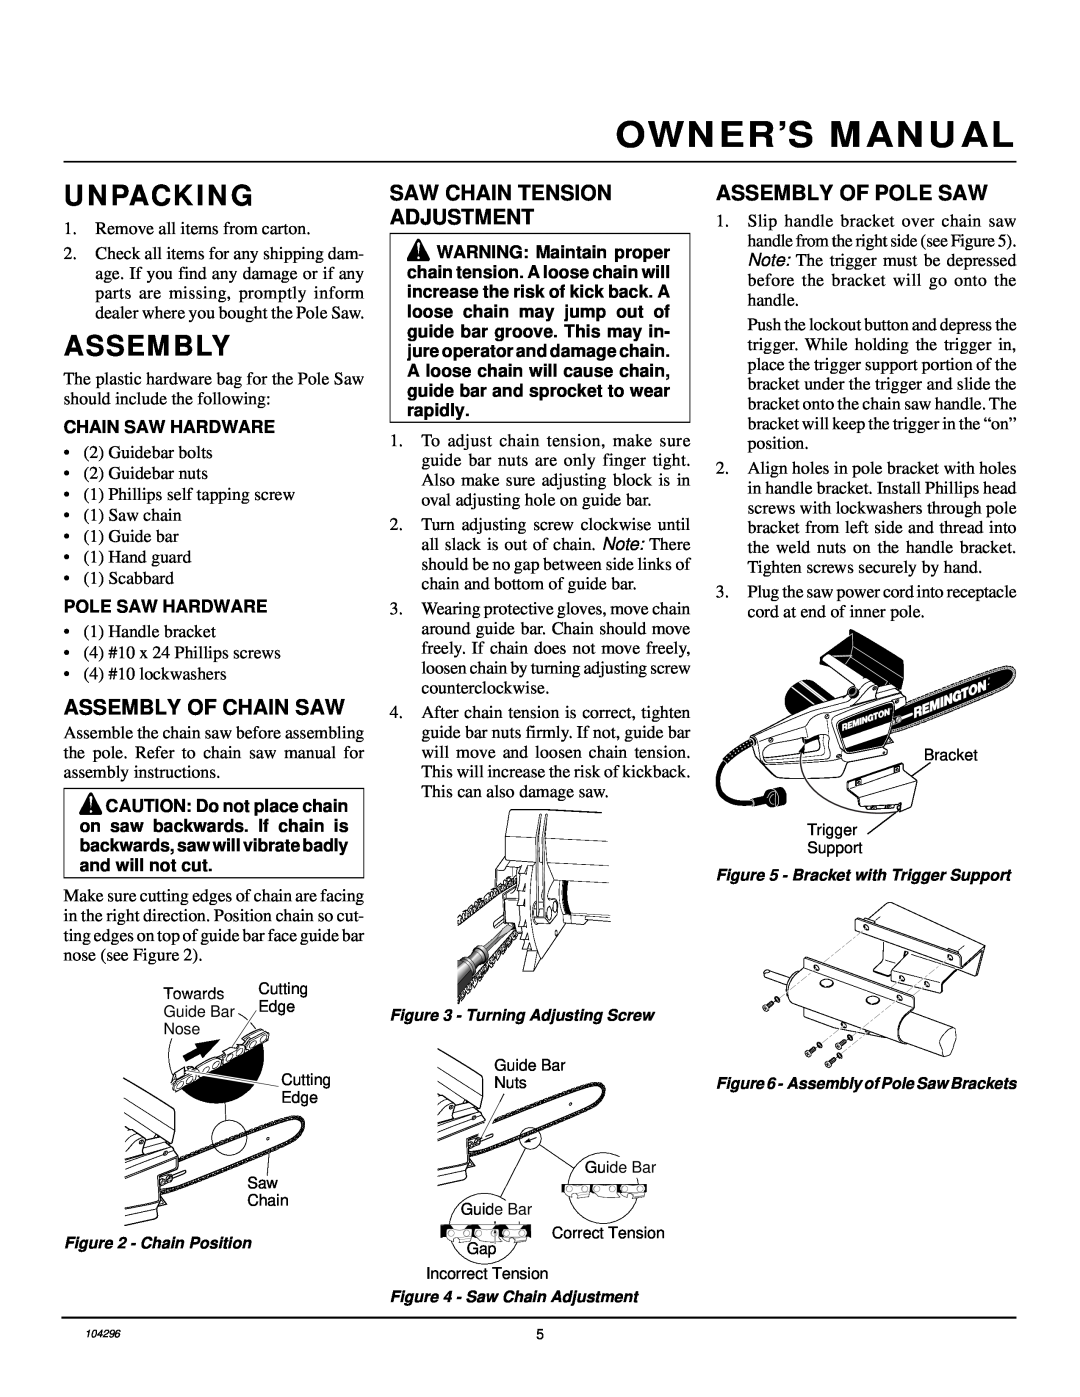 Remington RPS 96 owner manual Unpacking, Assembly Of Chain Saw, Saw Chain Tension Adjustment, Assembly Of Pole Saw 